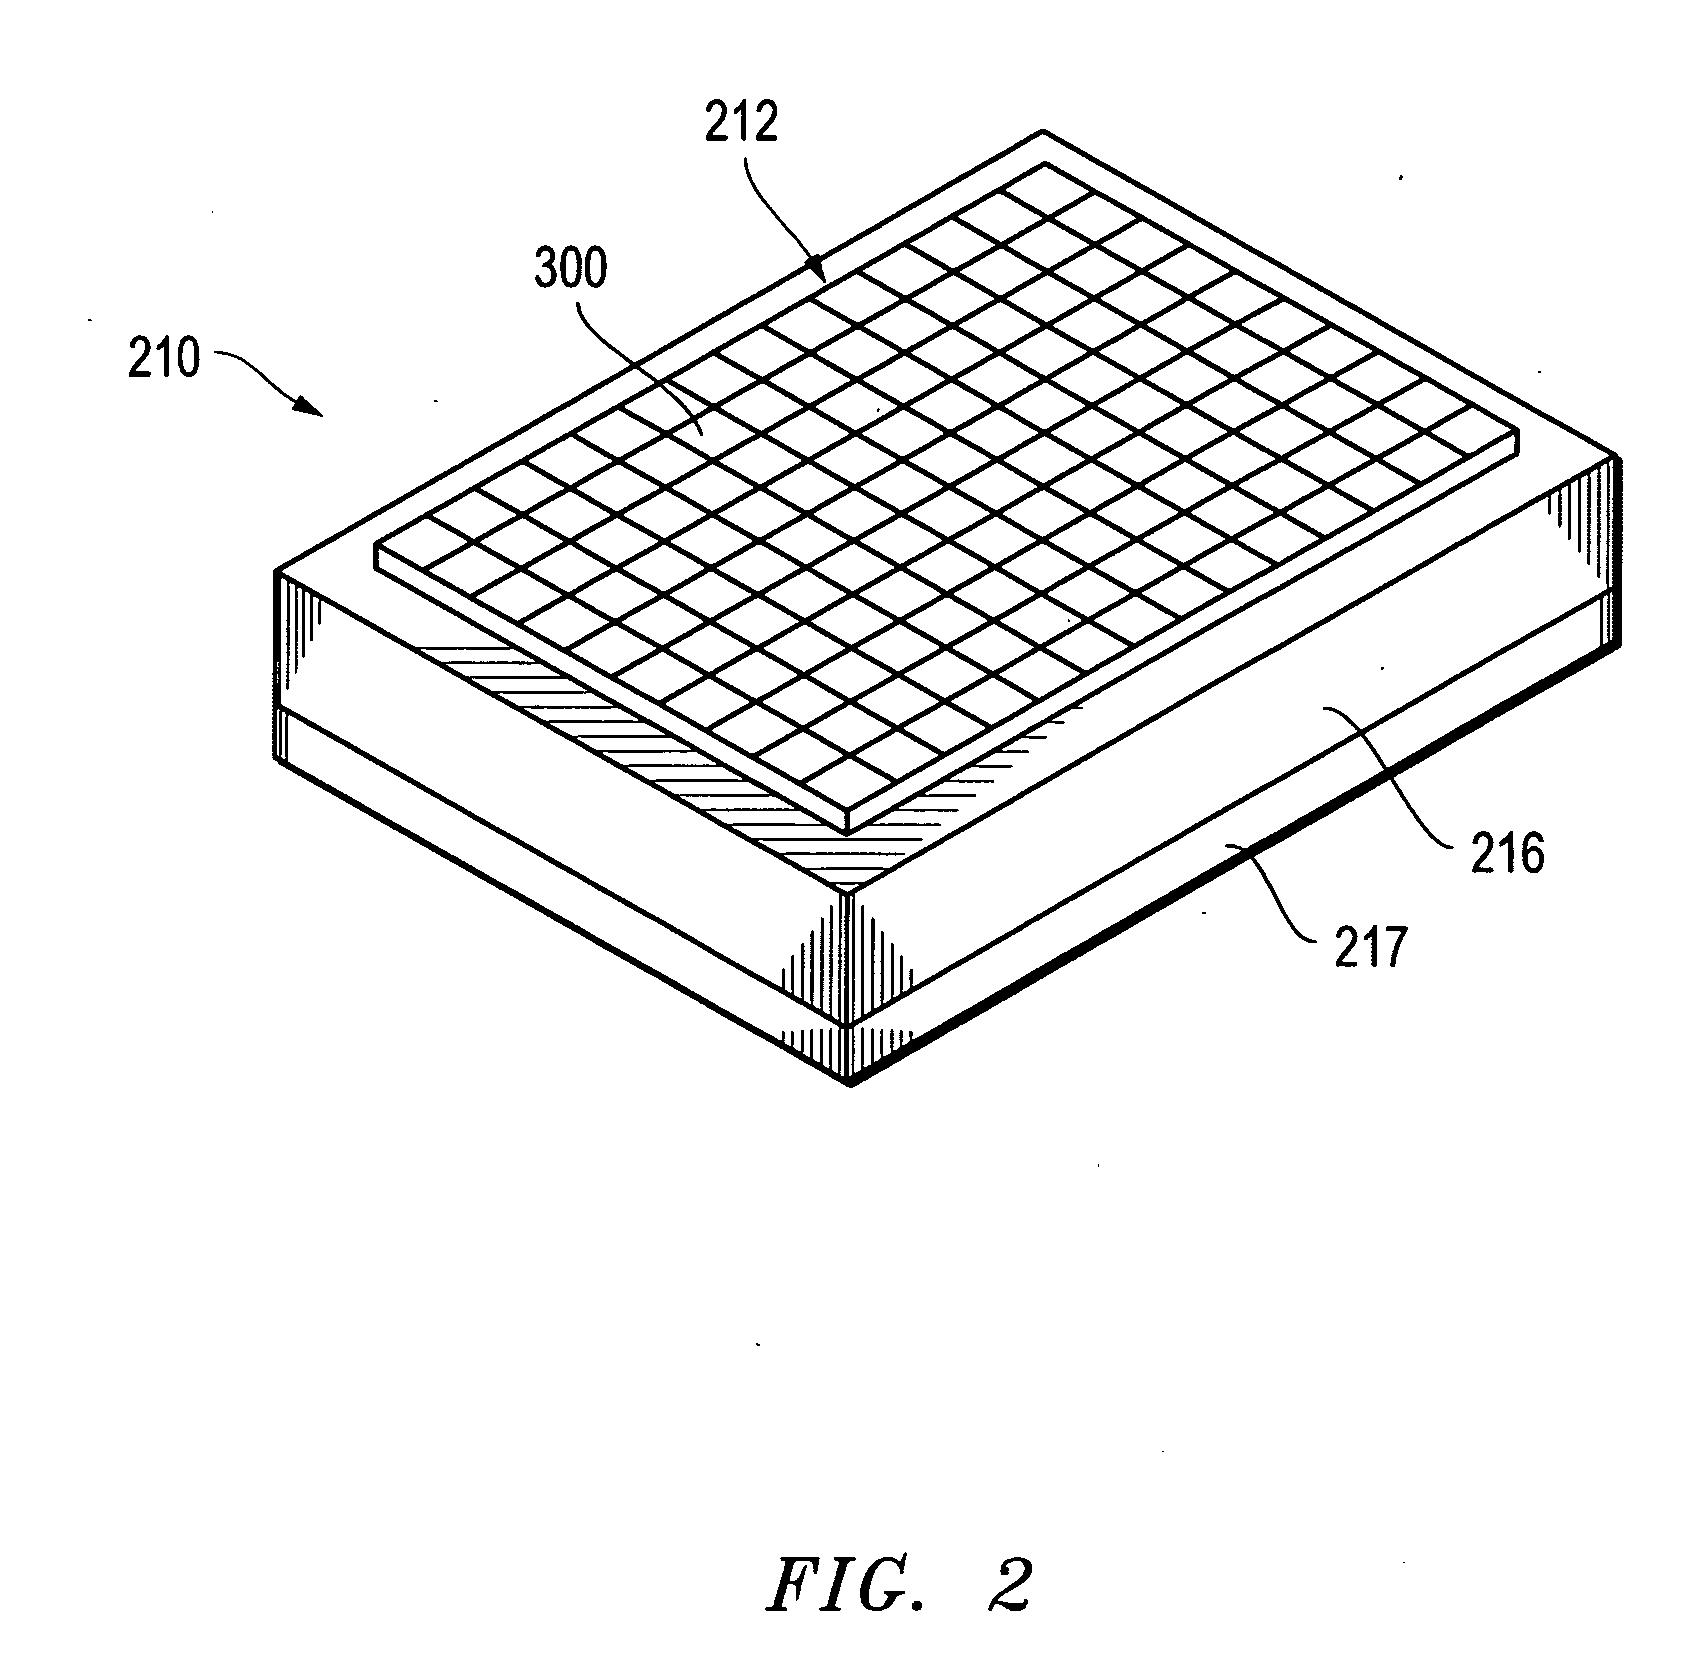 Optically transitioning thermal detector structures